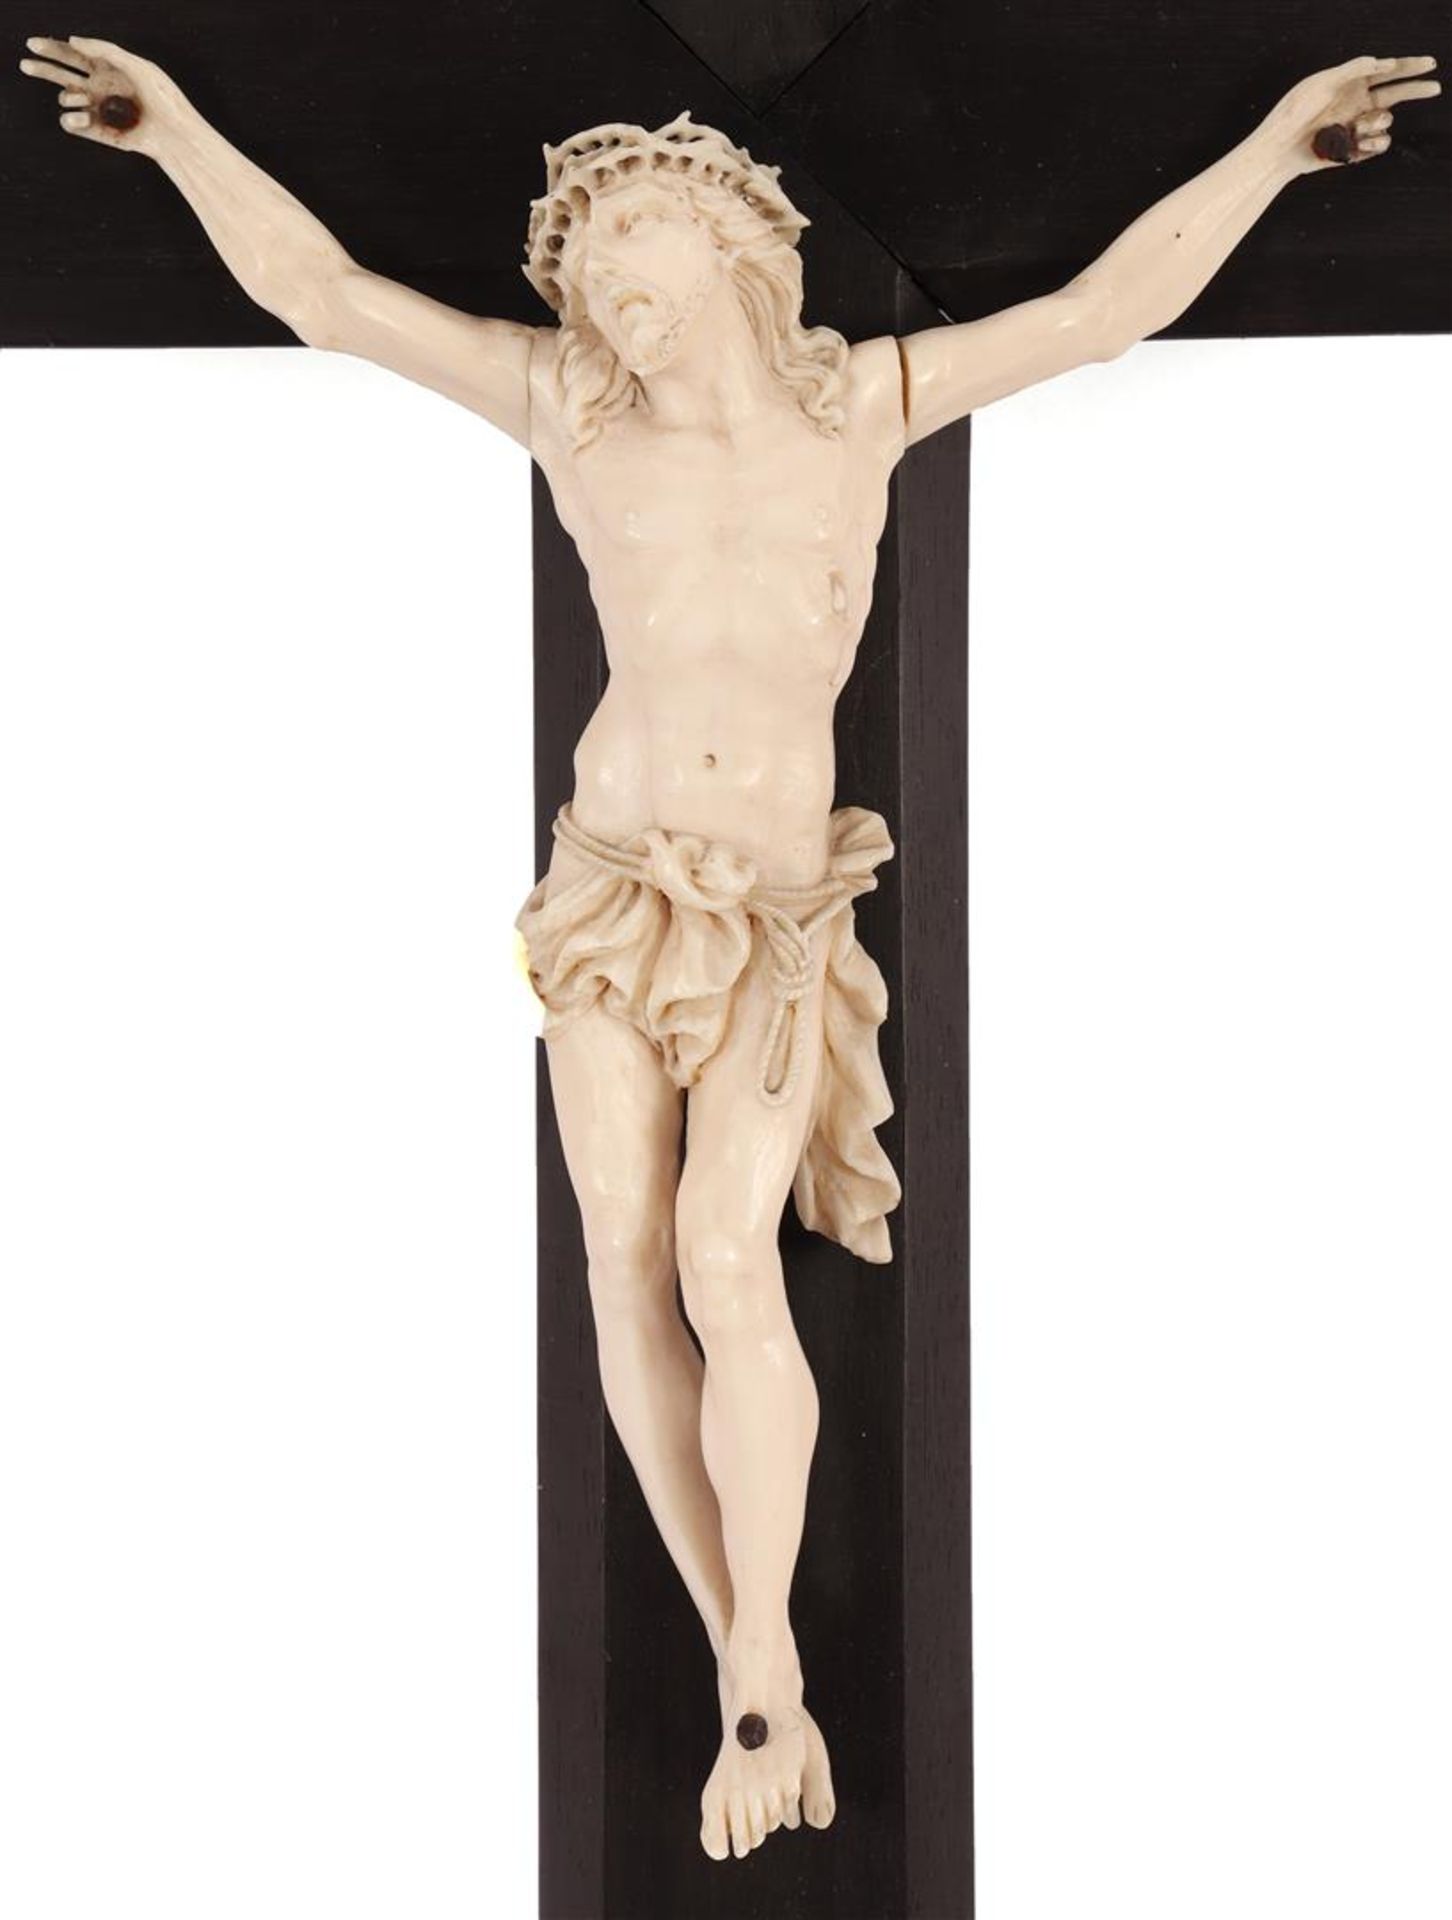 Richly carved ivory Corpus on wooden cross - Image 2 of 2